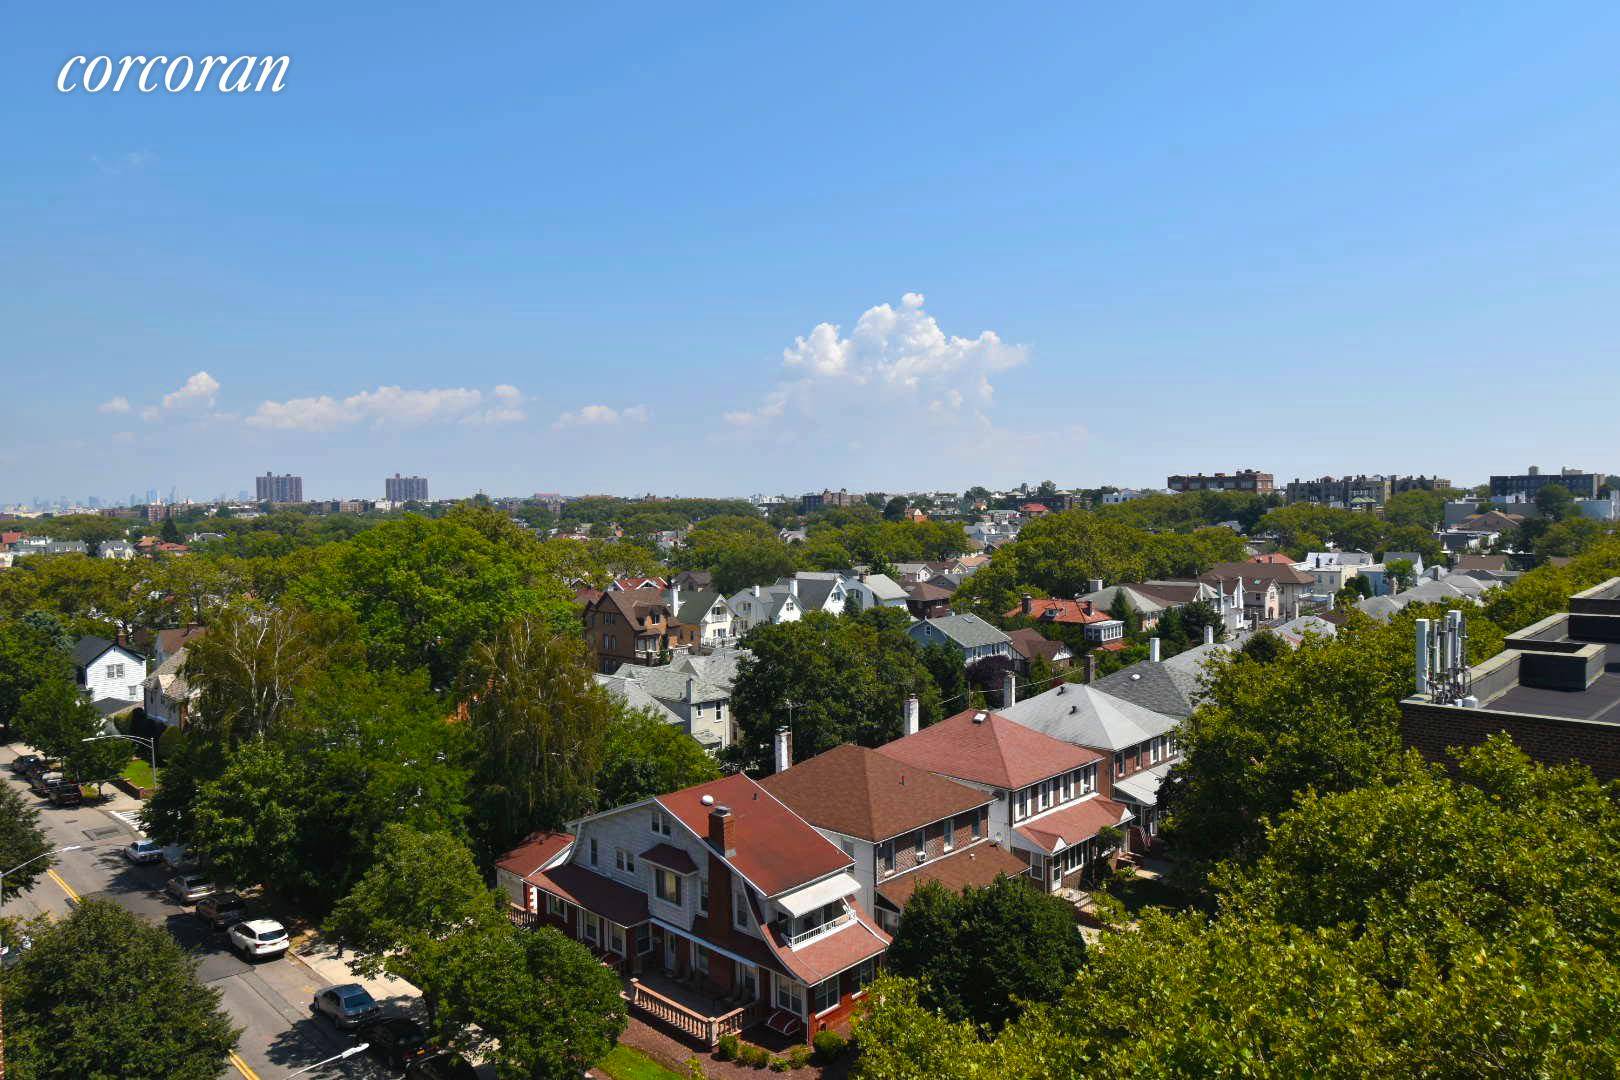 REDUCED You'll love the open high floor views over the rooftops of Bay Ridge from this exceptionally bright, airy, and spacious one bedroom apartment.